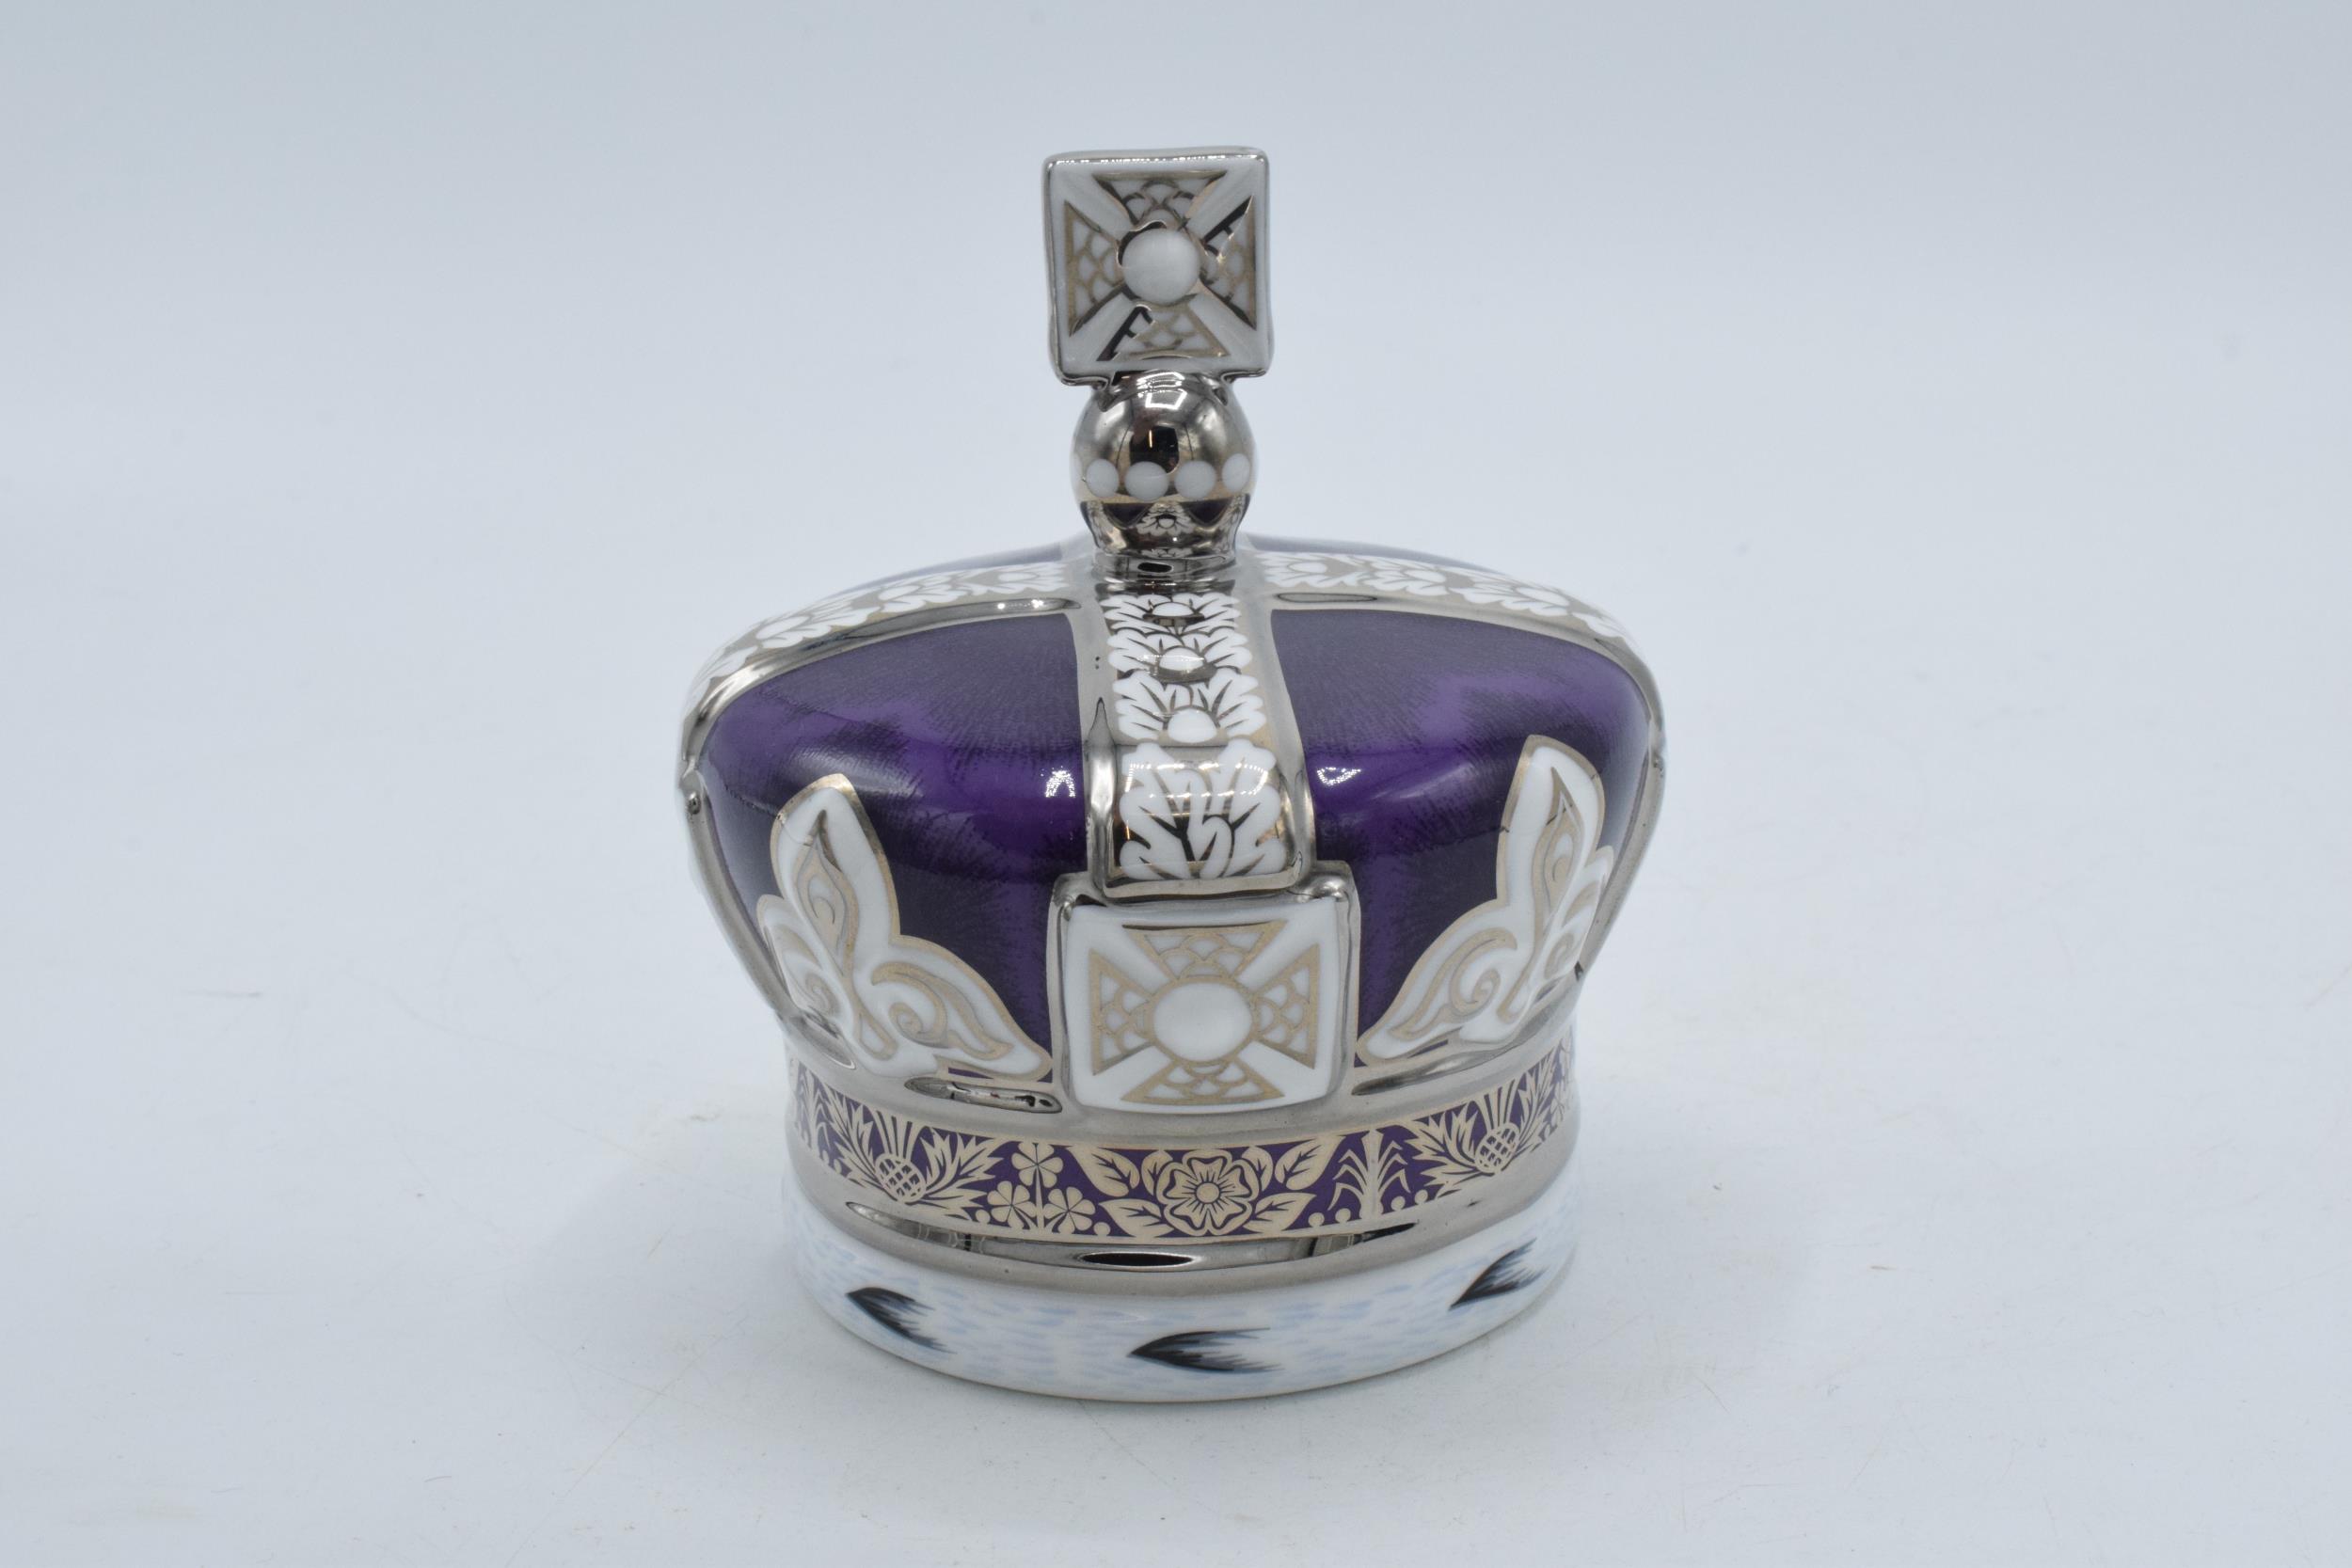 Royal Crown Derby paperweight, Coronation Crown, number 27 of a limited edition of 500 - Image 2 of 3